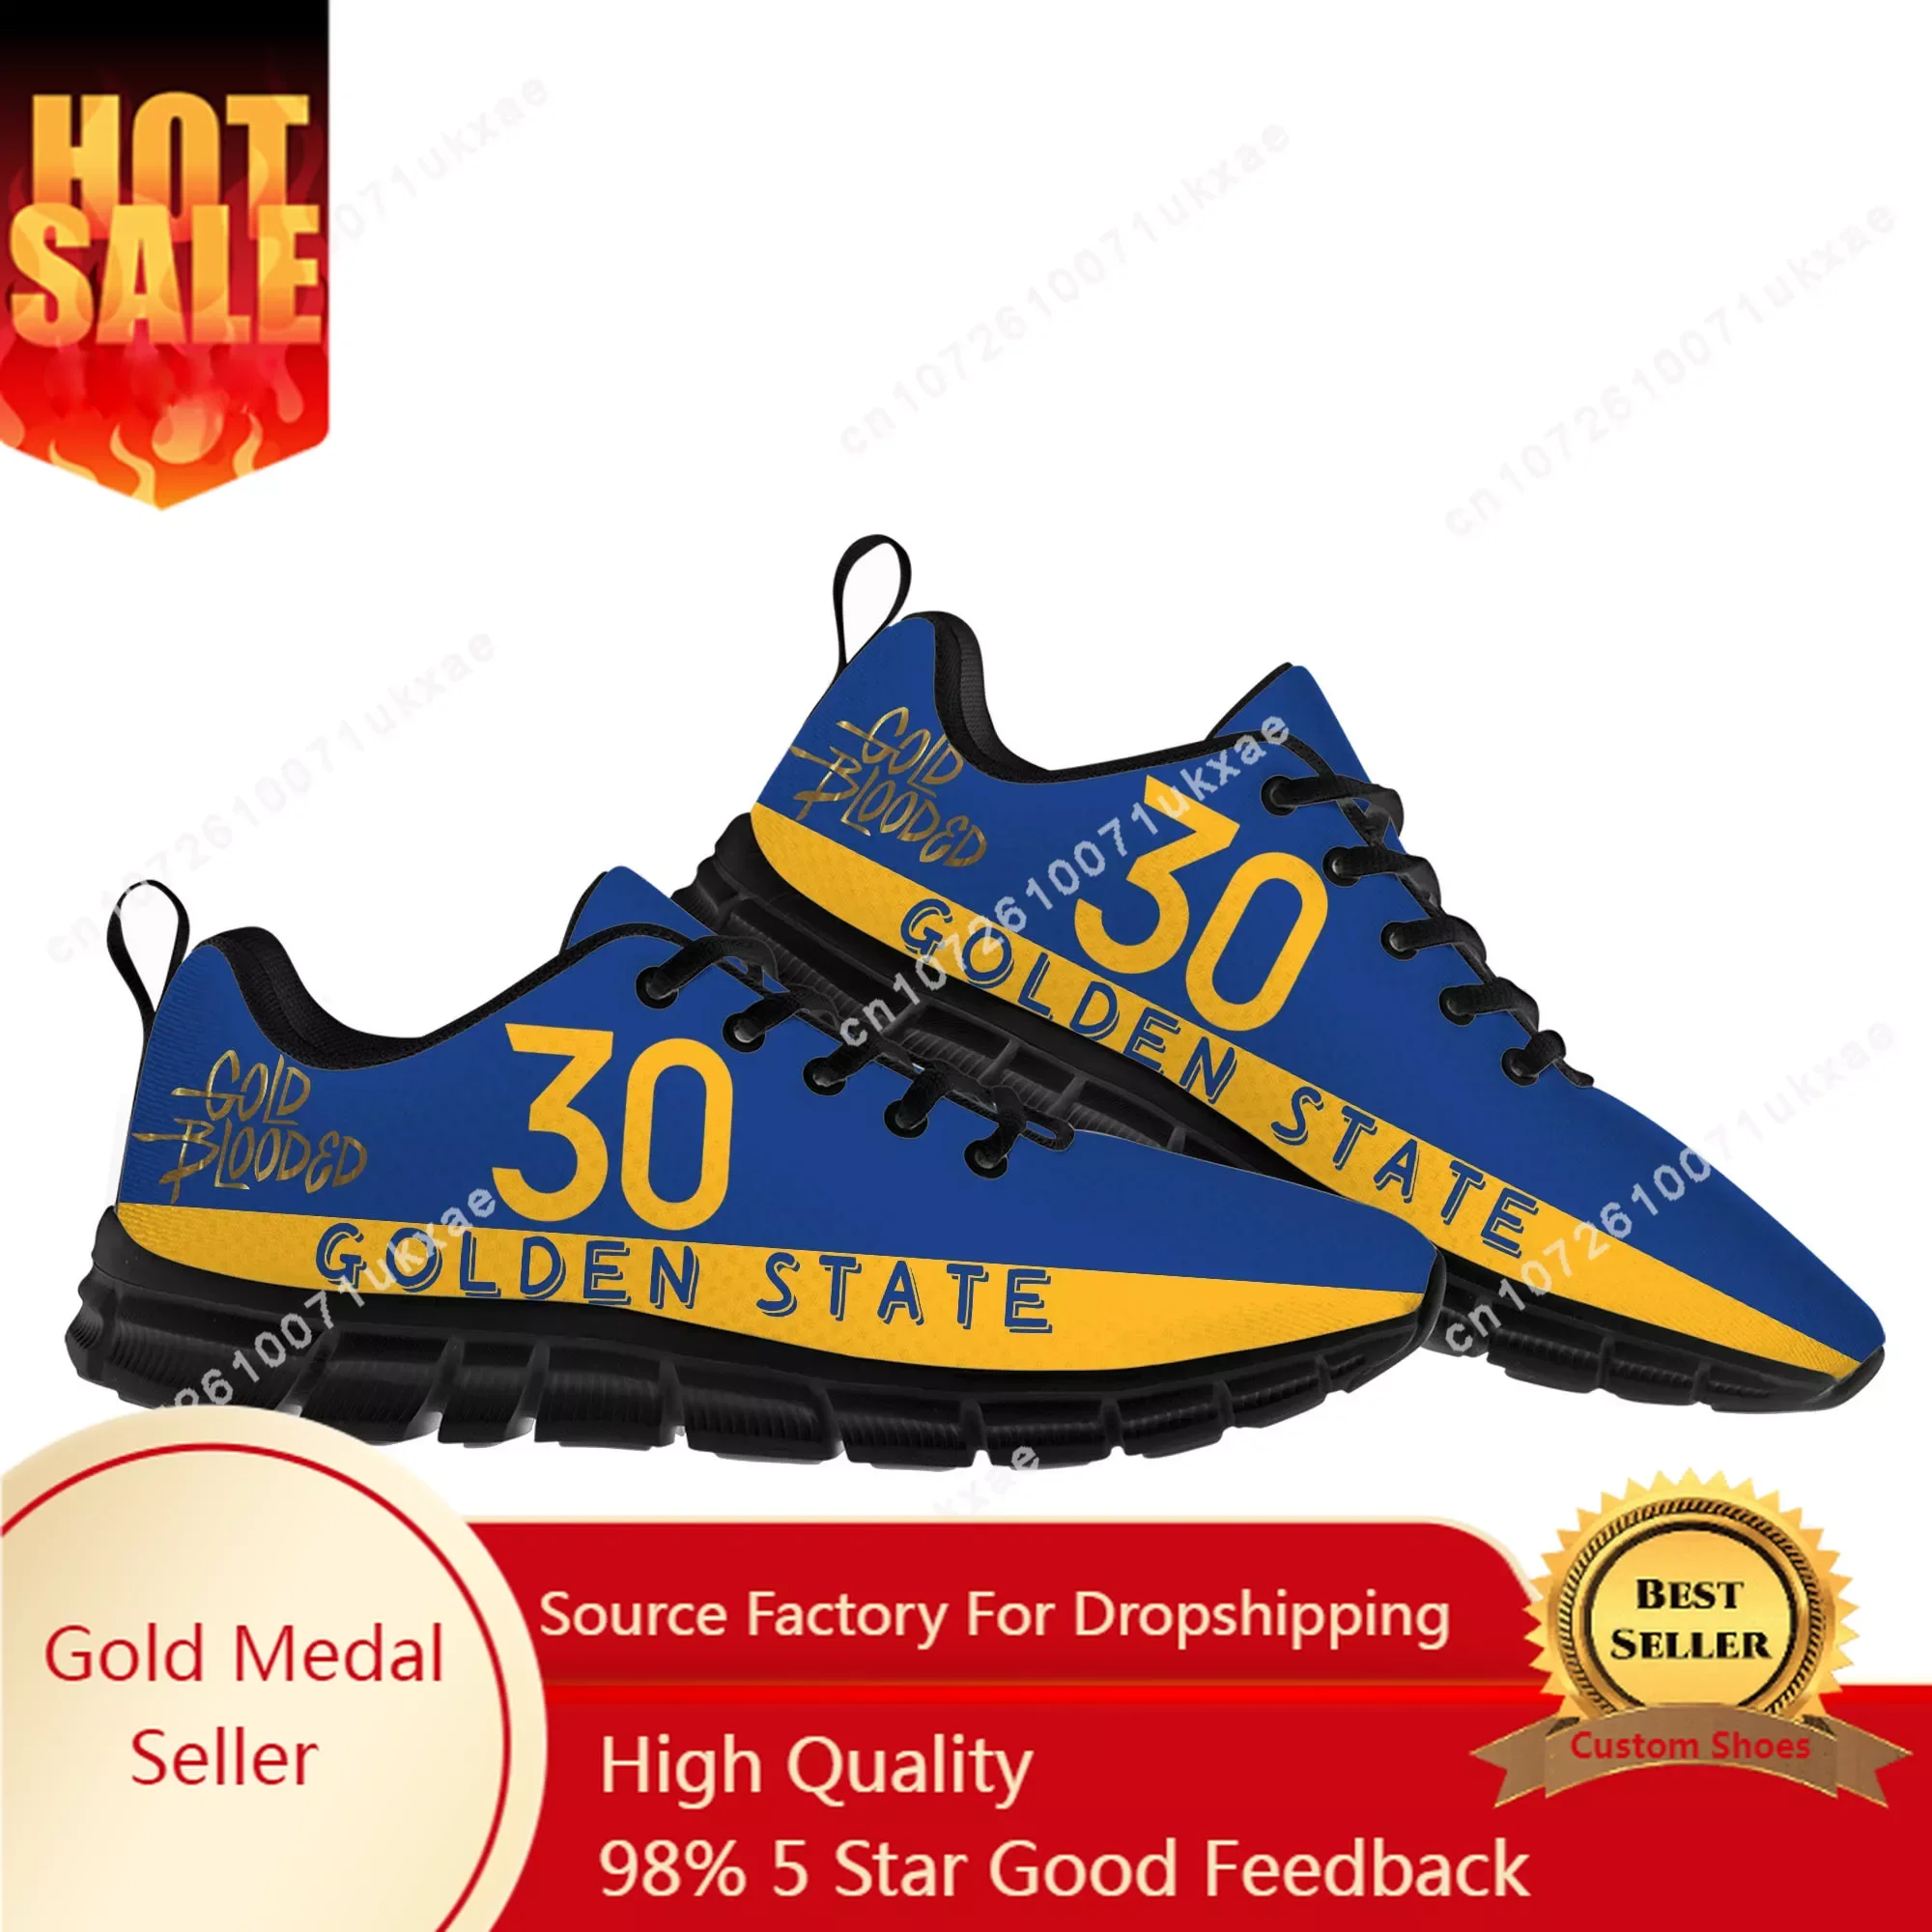 

golden state Number 30 11 23 Gold Blooded Sports Shoes Mens Womens Teenager Kids Sneakers Parent Child Sneaker Customize Shoe